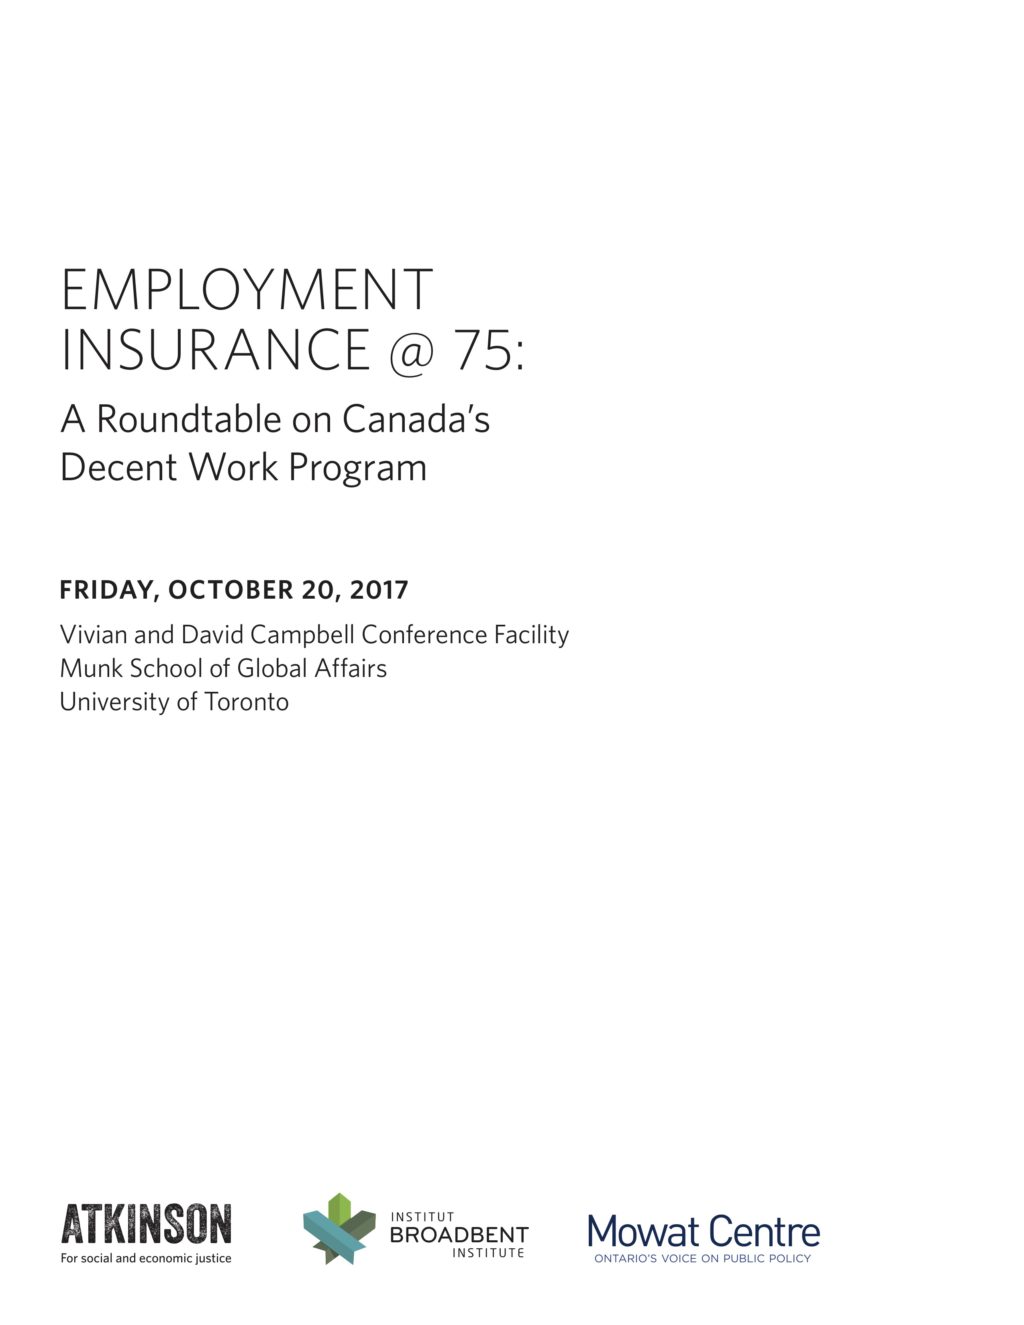 Cover Image: Employment Insurance @ 75
